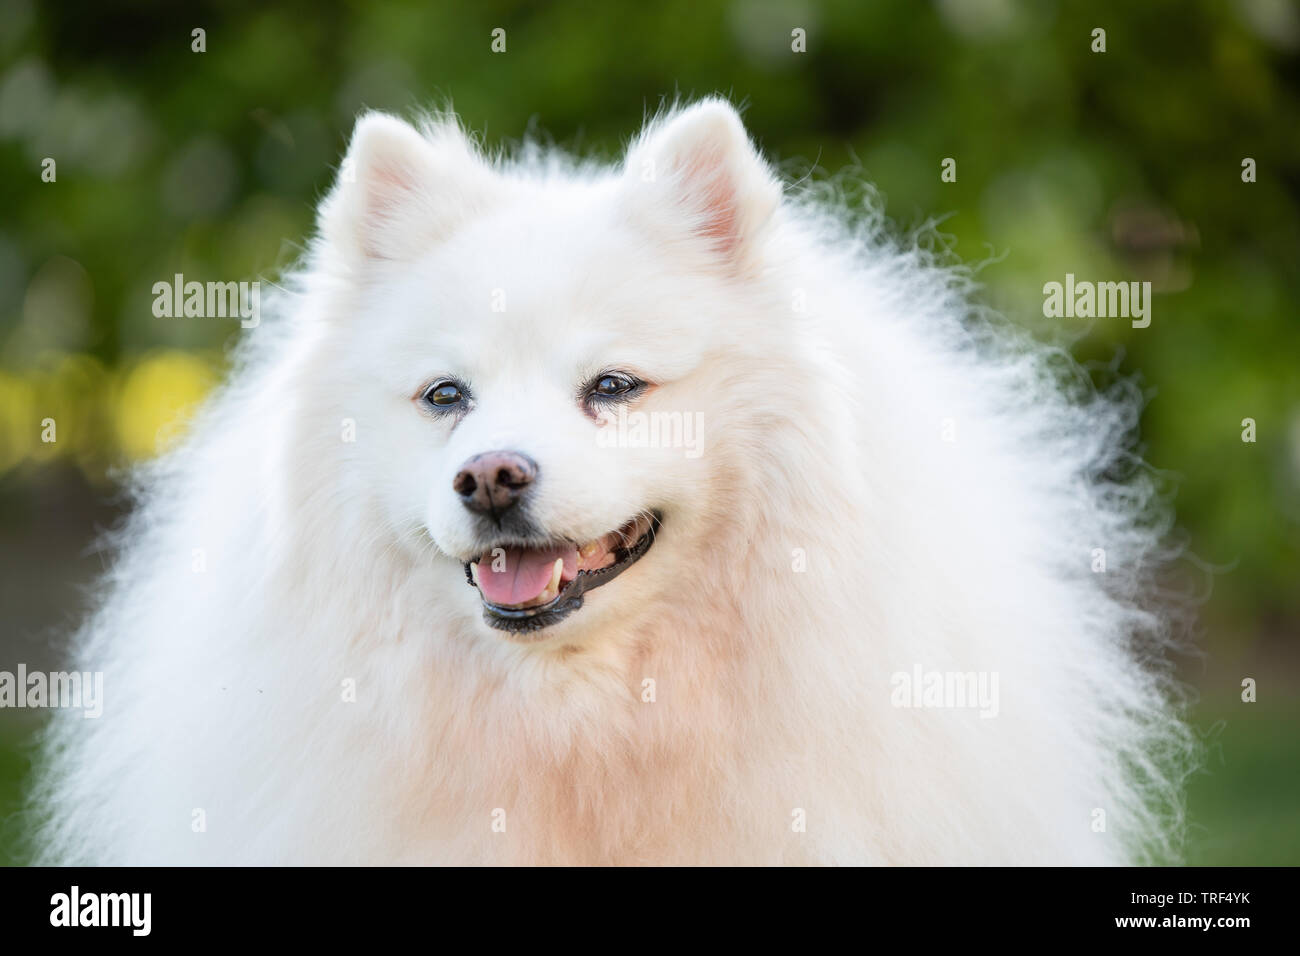 A portrait of an American Eskimo dog. These dogs are a member of the Spitz family, originating in Germany. Stock Photo